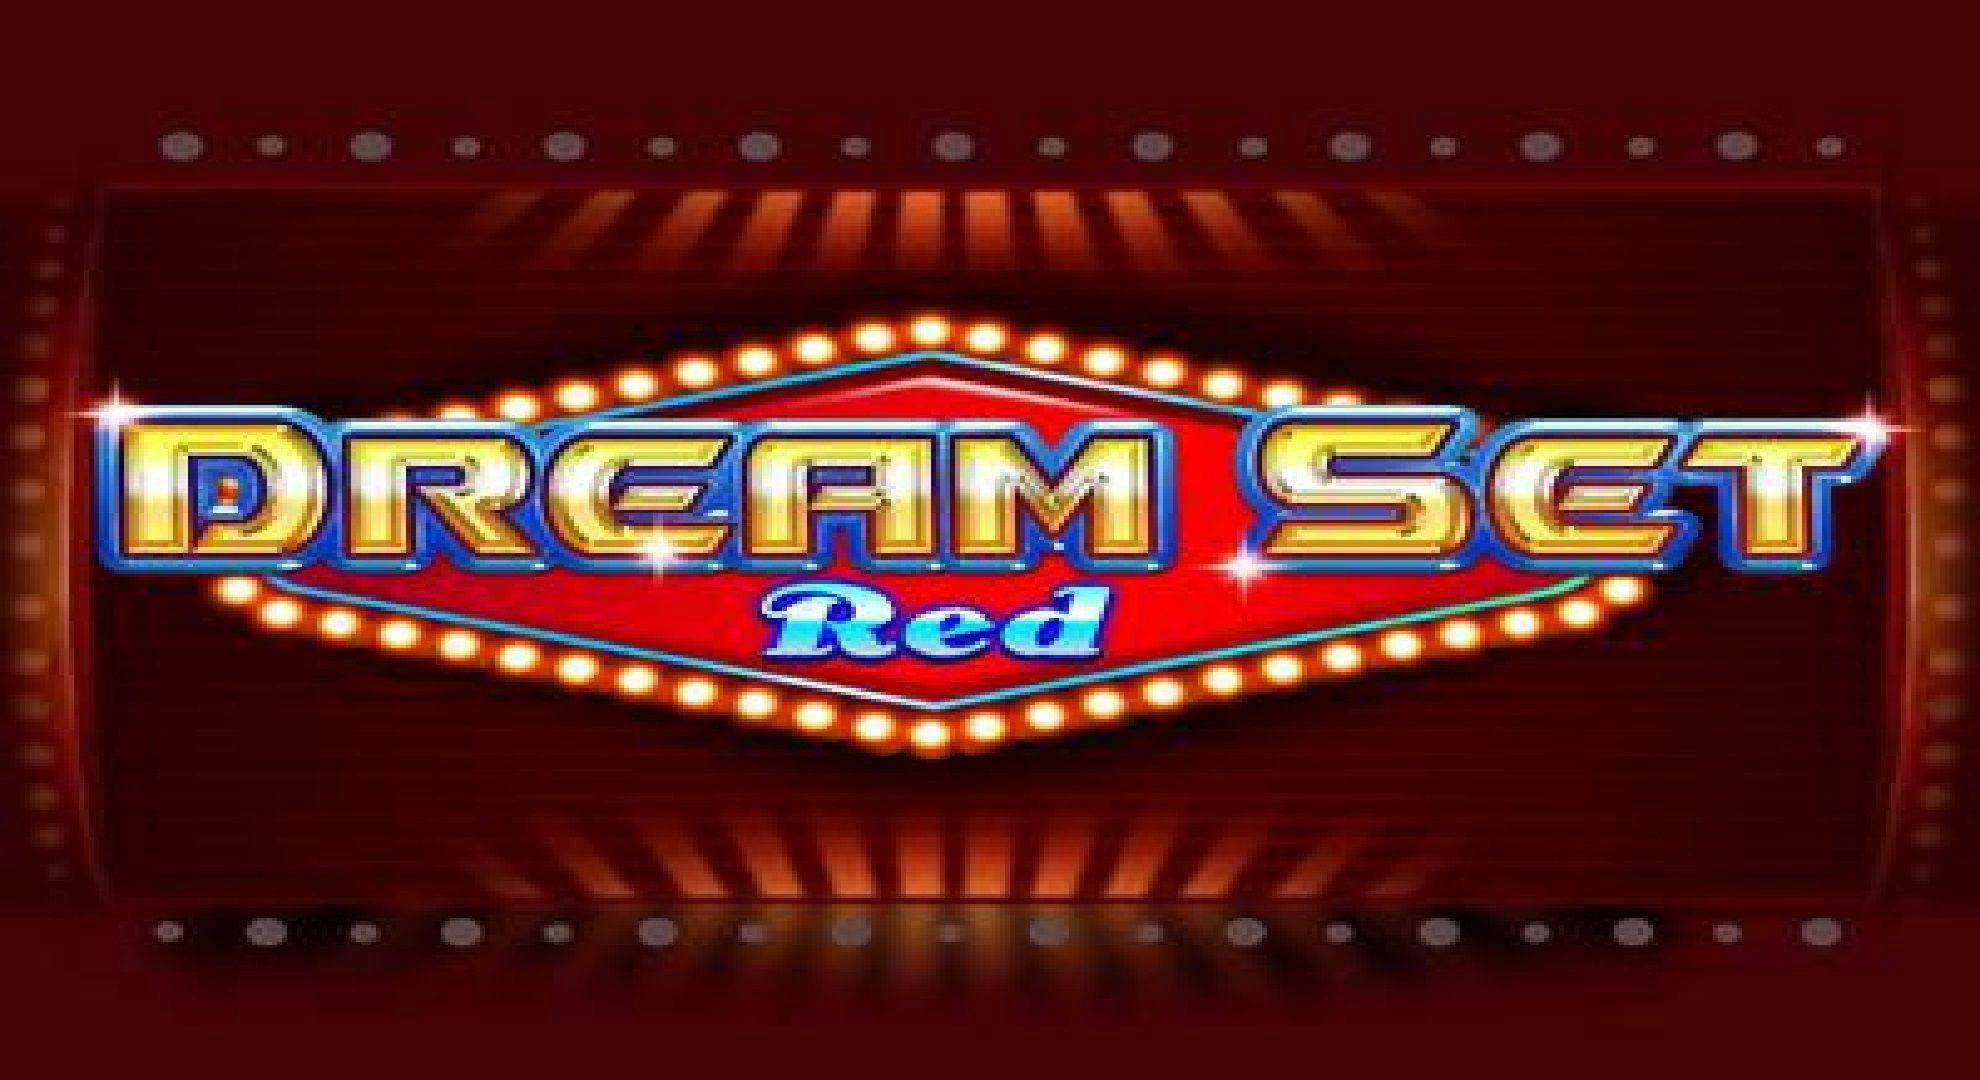 Dream Set Red Slot Online Free Play